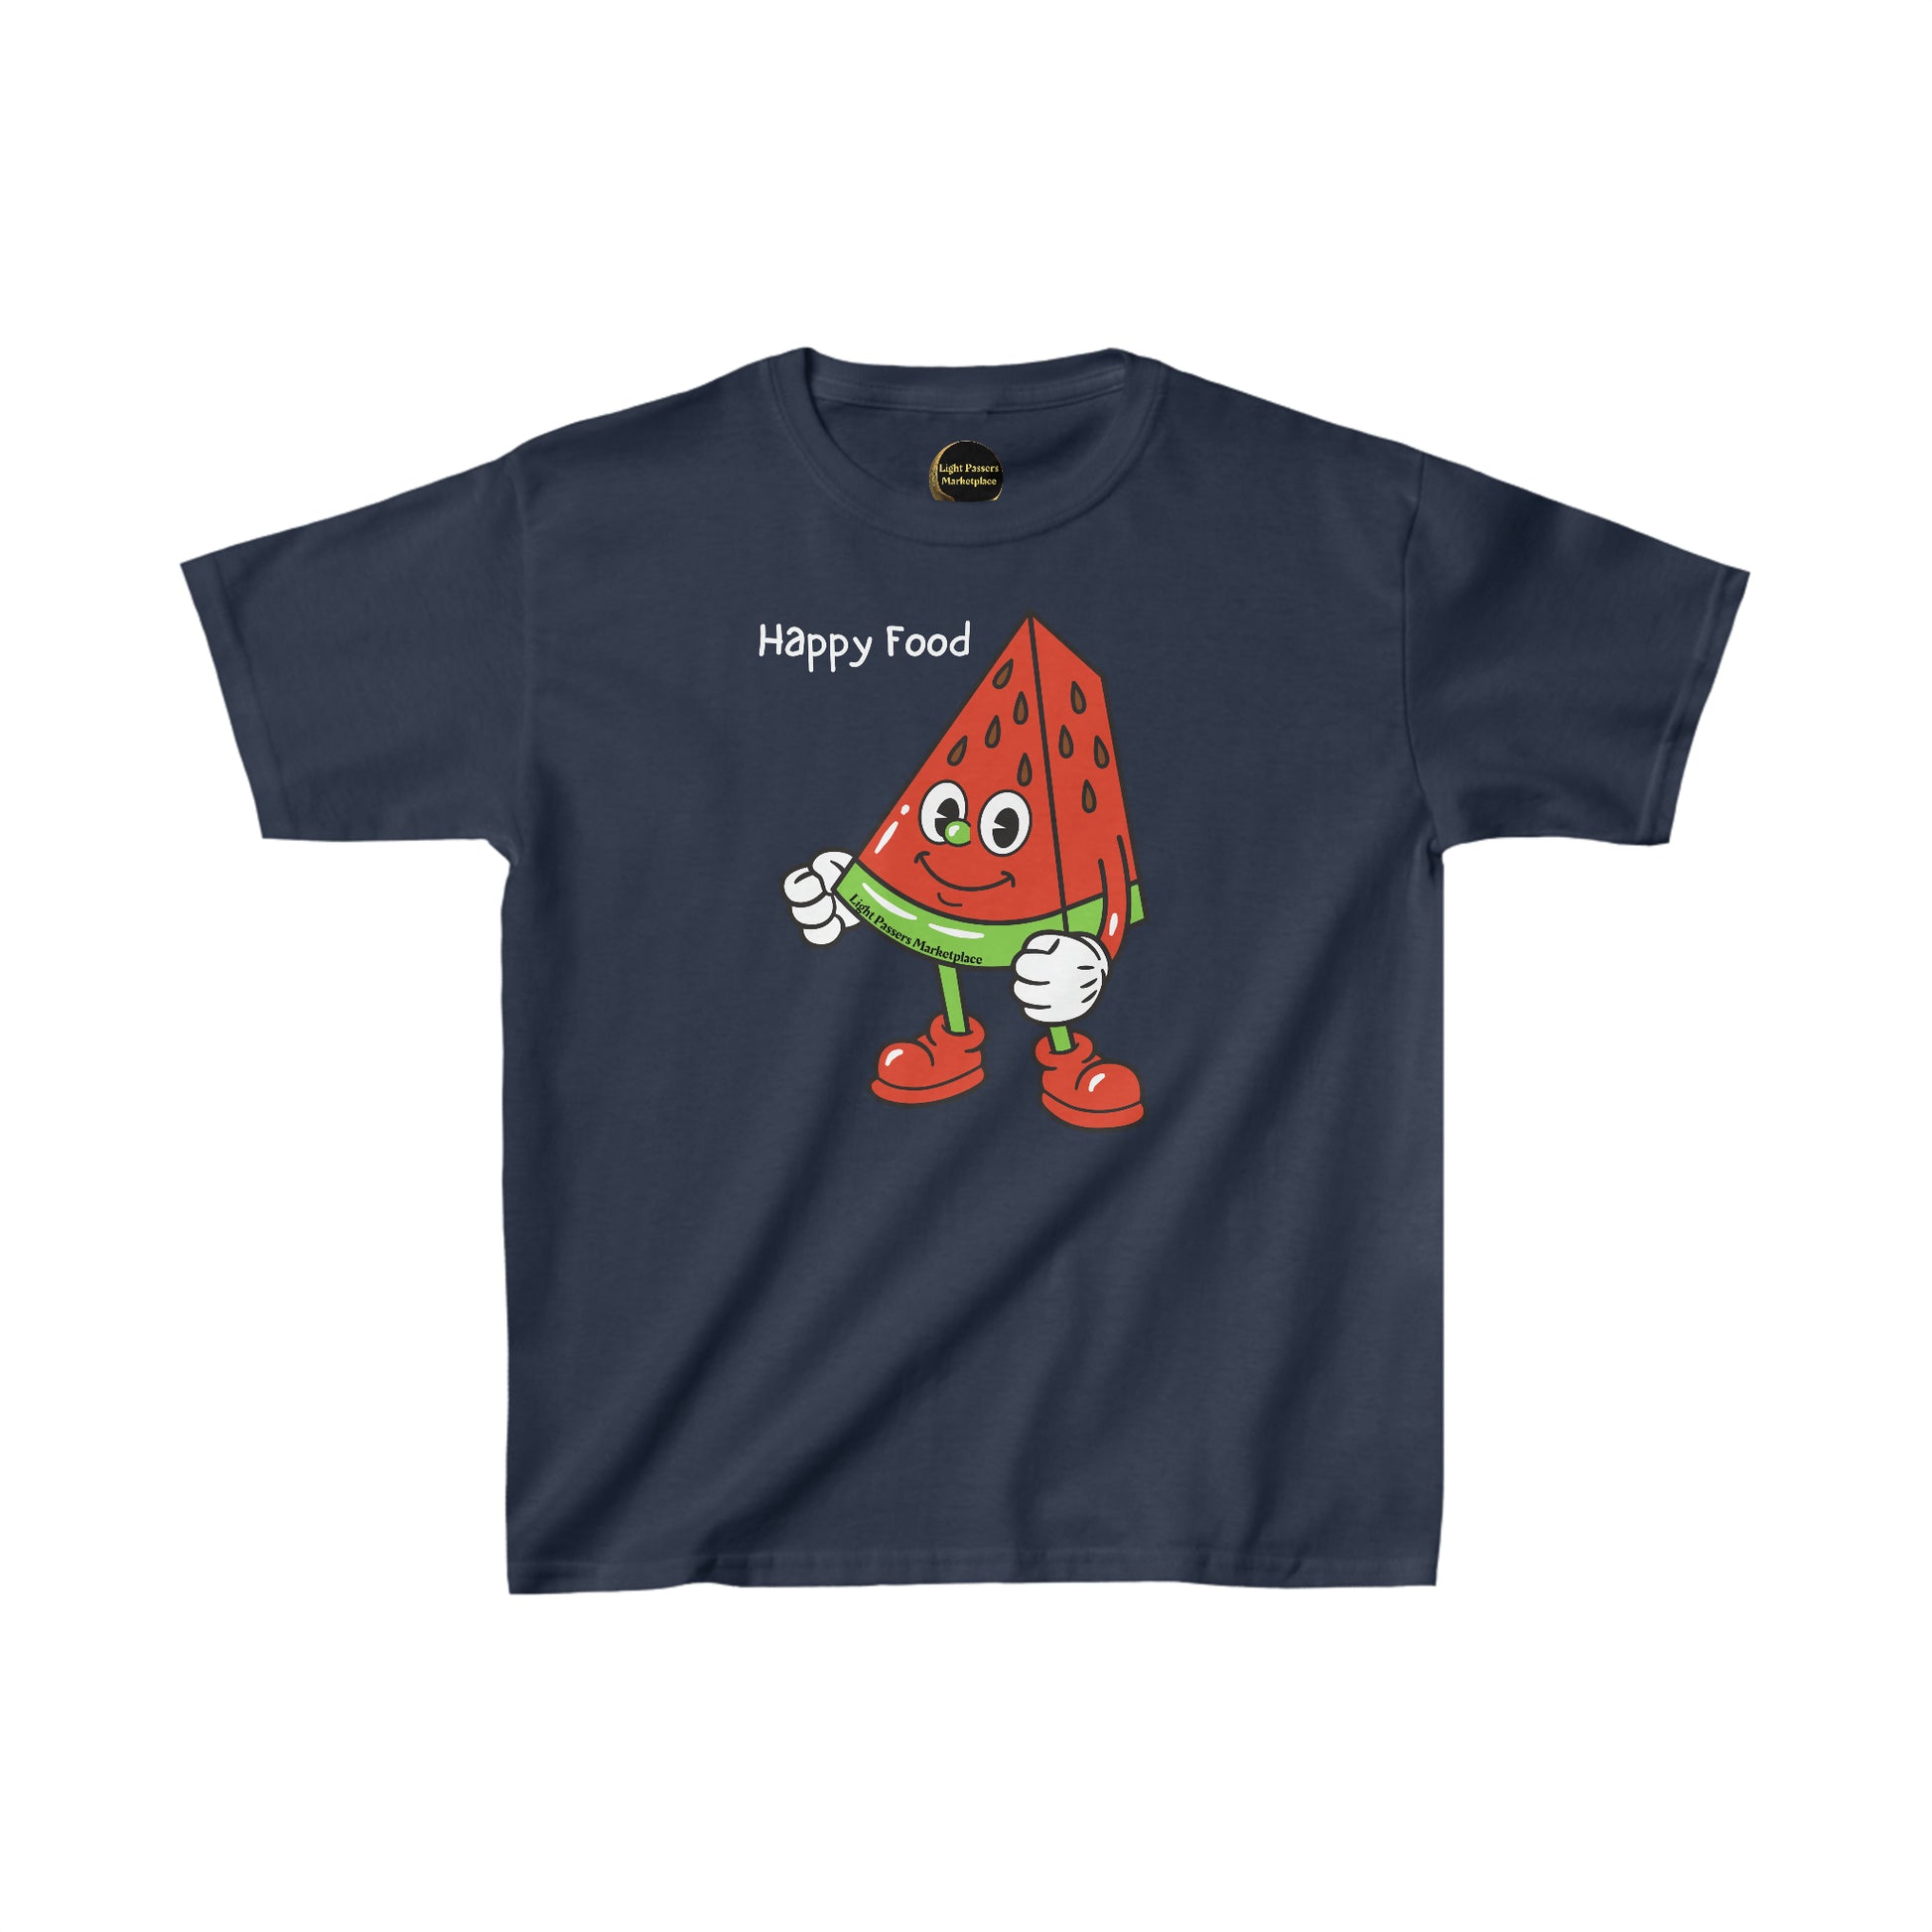 A youth t-shirt featuring a cartoon watermelon character, made of 100% cotton with twill tape shoulders for durability. Ethically sourced US cotton with tear-away labels for comfort.